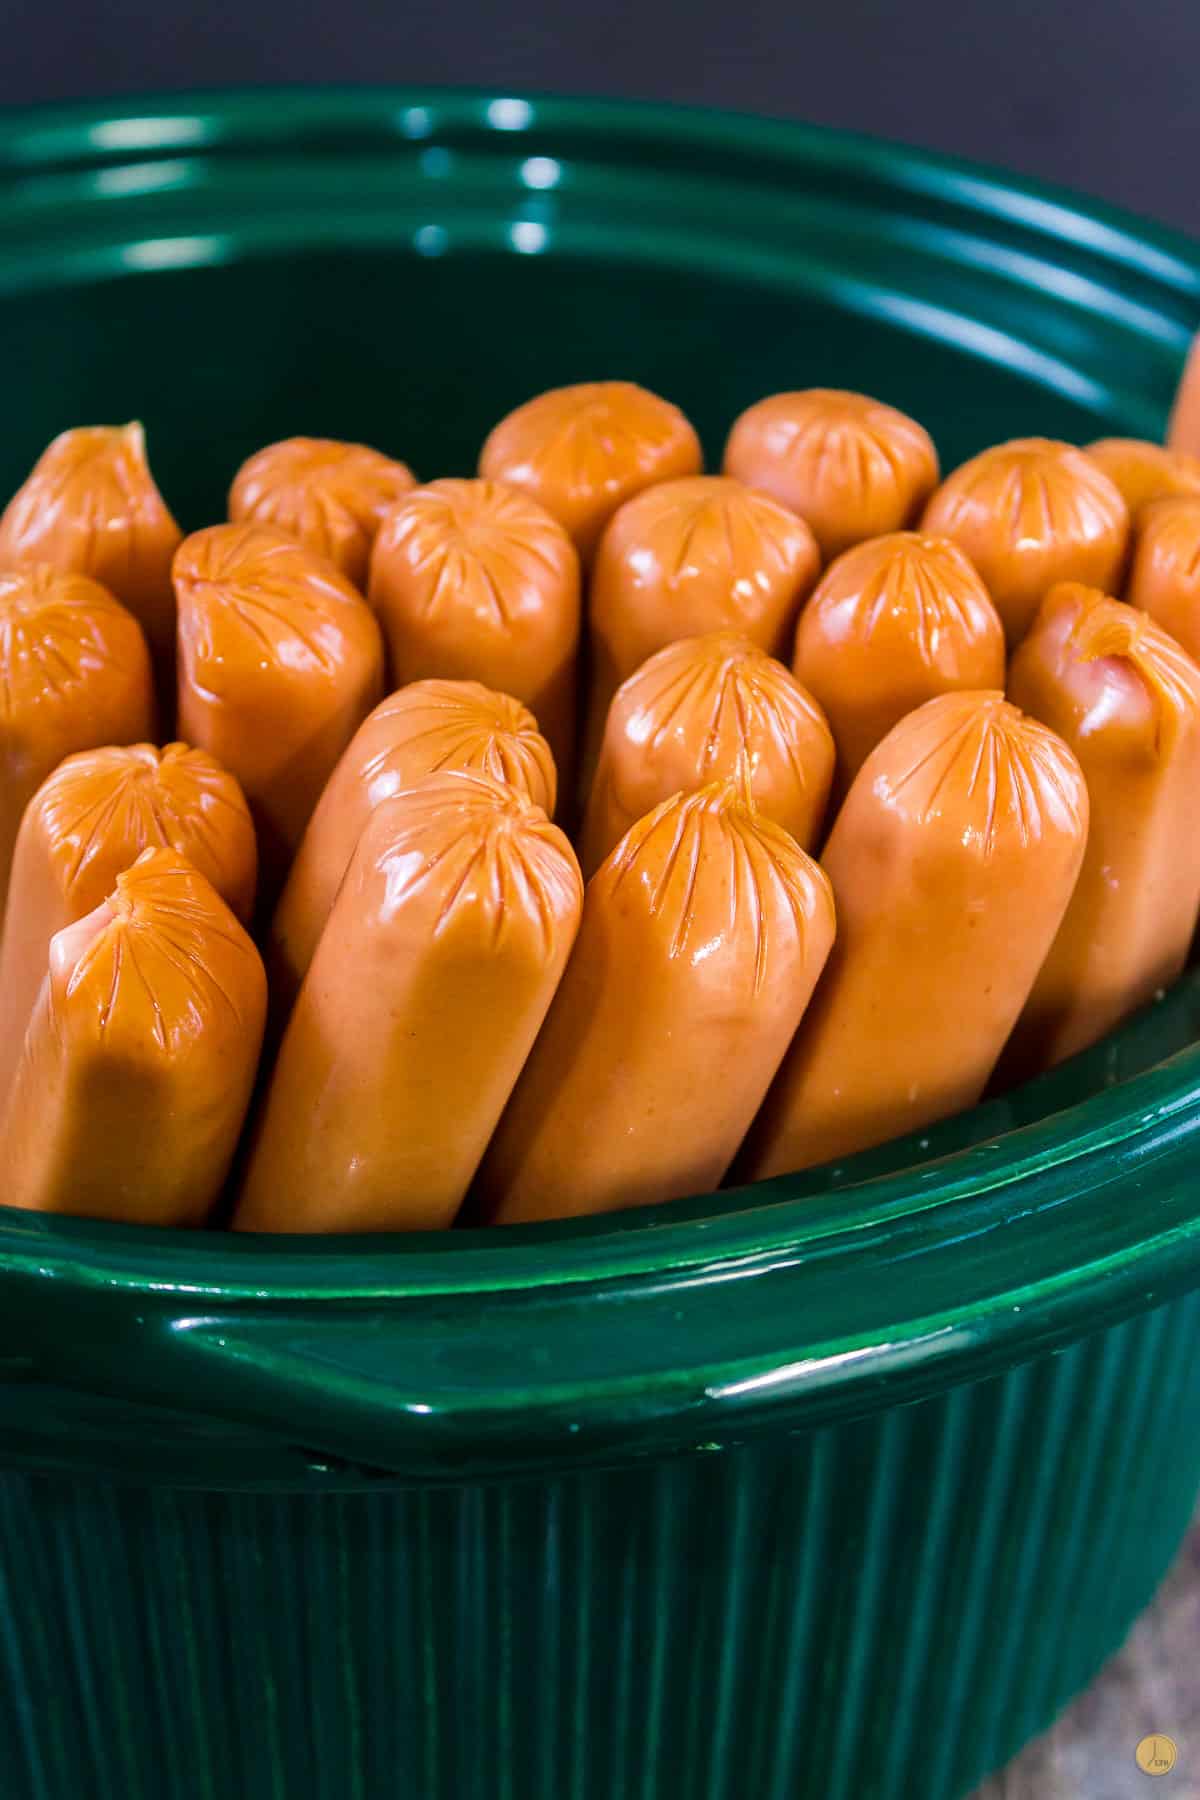 hot dogs standing on end in a green slow cooker bowl